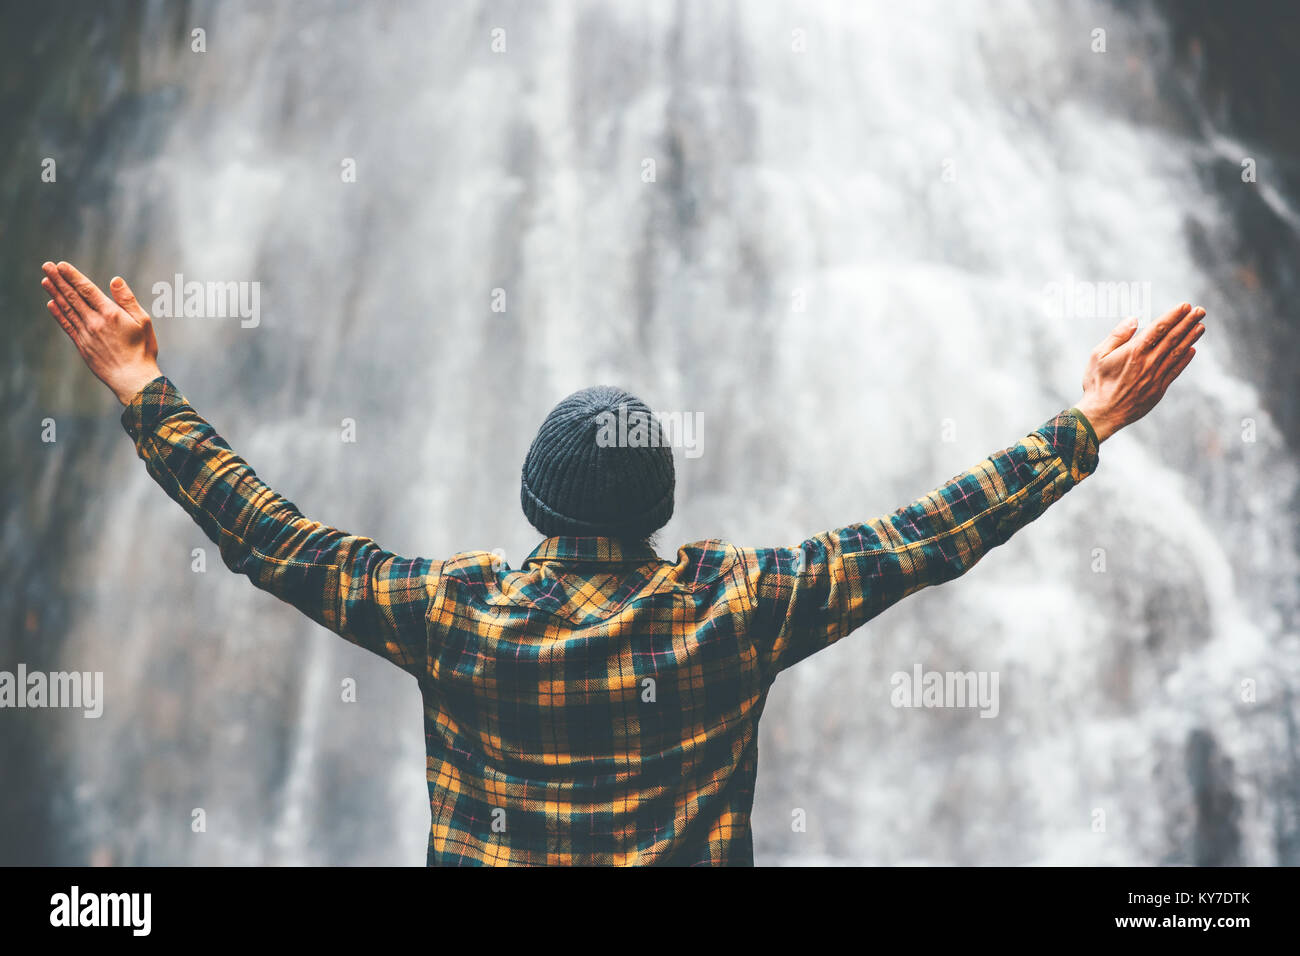 Man enjoying waterfall raised hands Travel Lifestyle and success concept vacations into the wild wearing cozy shirt and hat Stock Photo